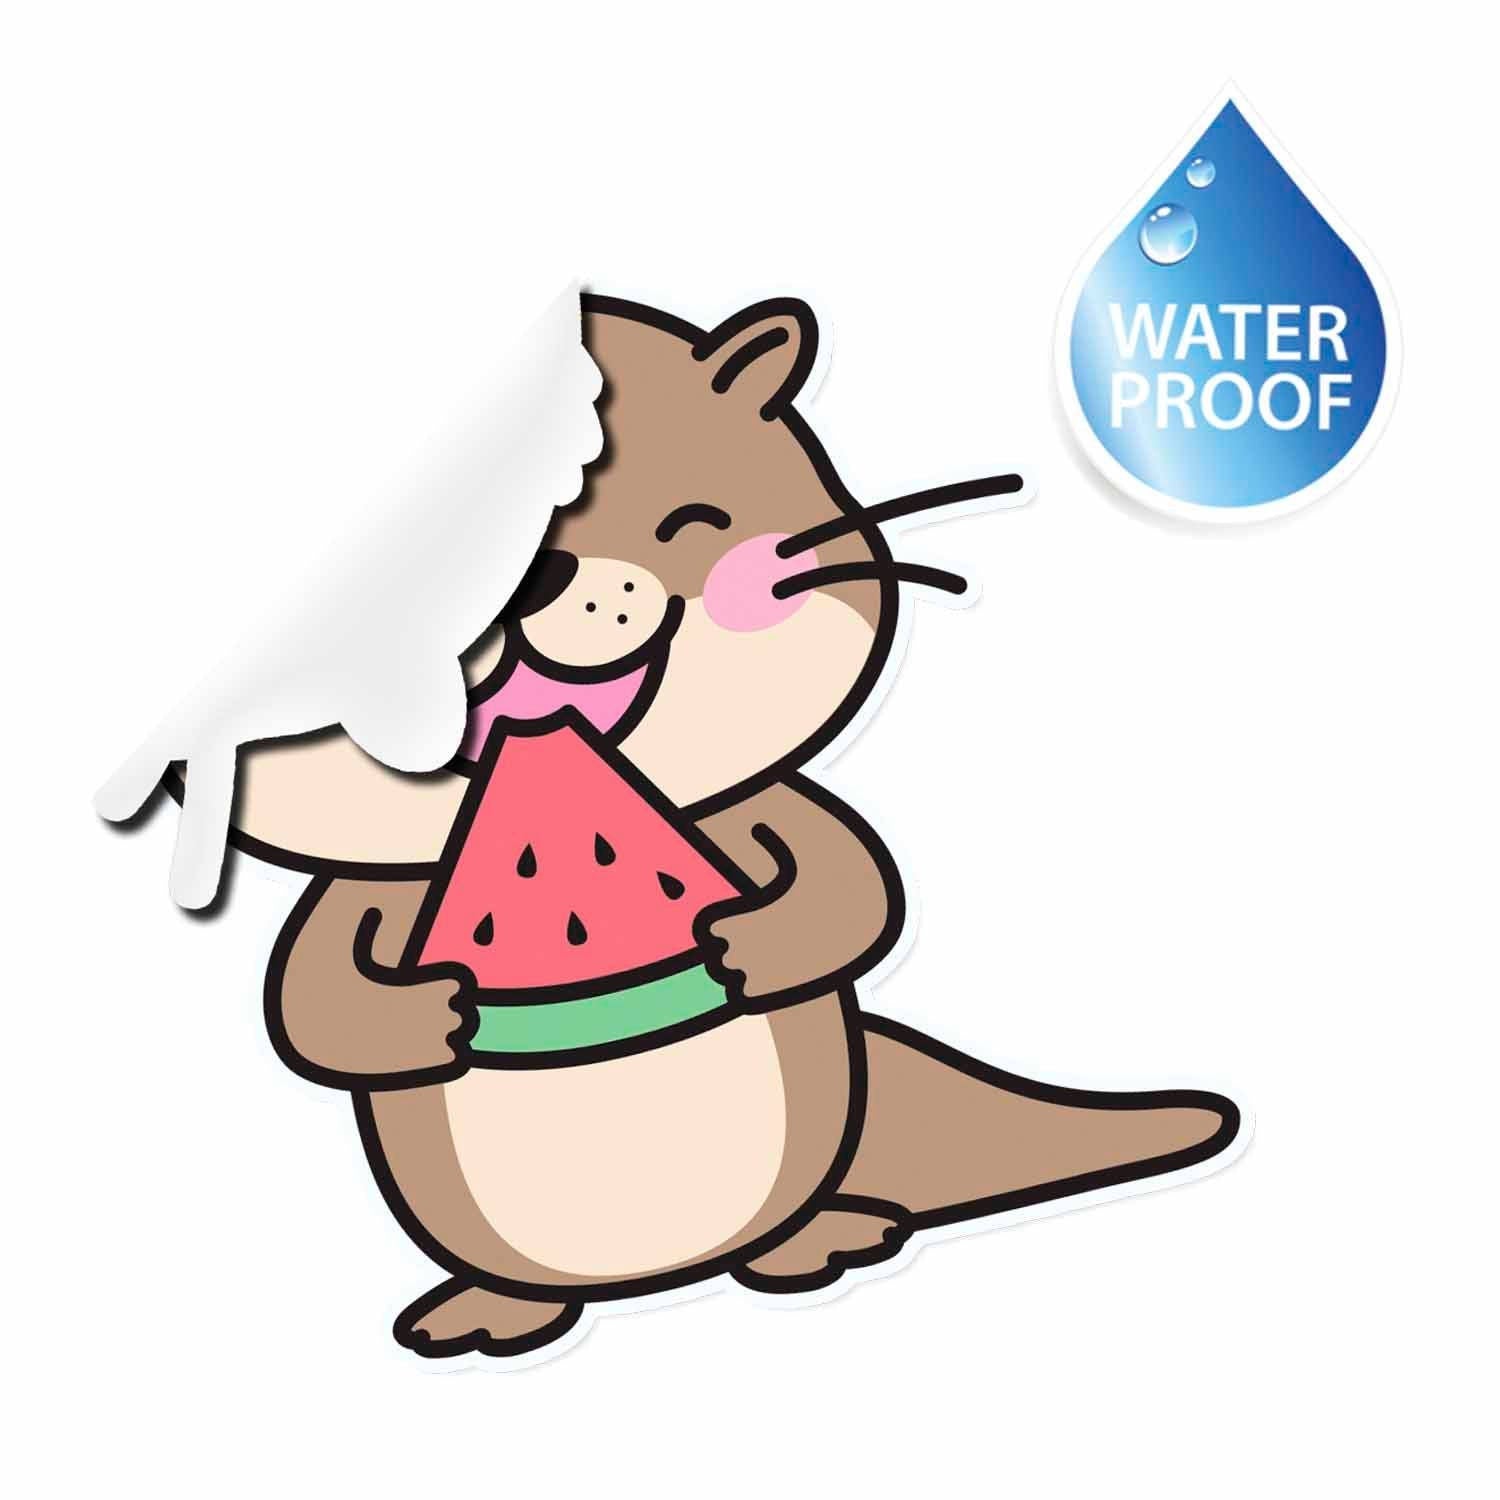 20 Pcs Summer Fun Otter Stickers - Brighten Up Your Items with Playful Otter Charm!